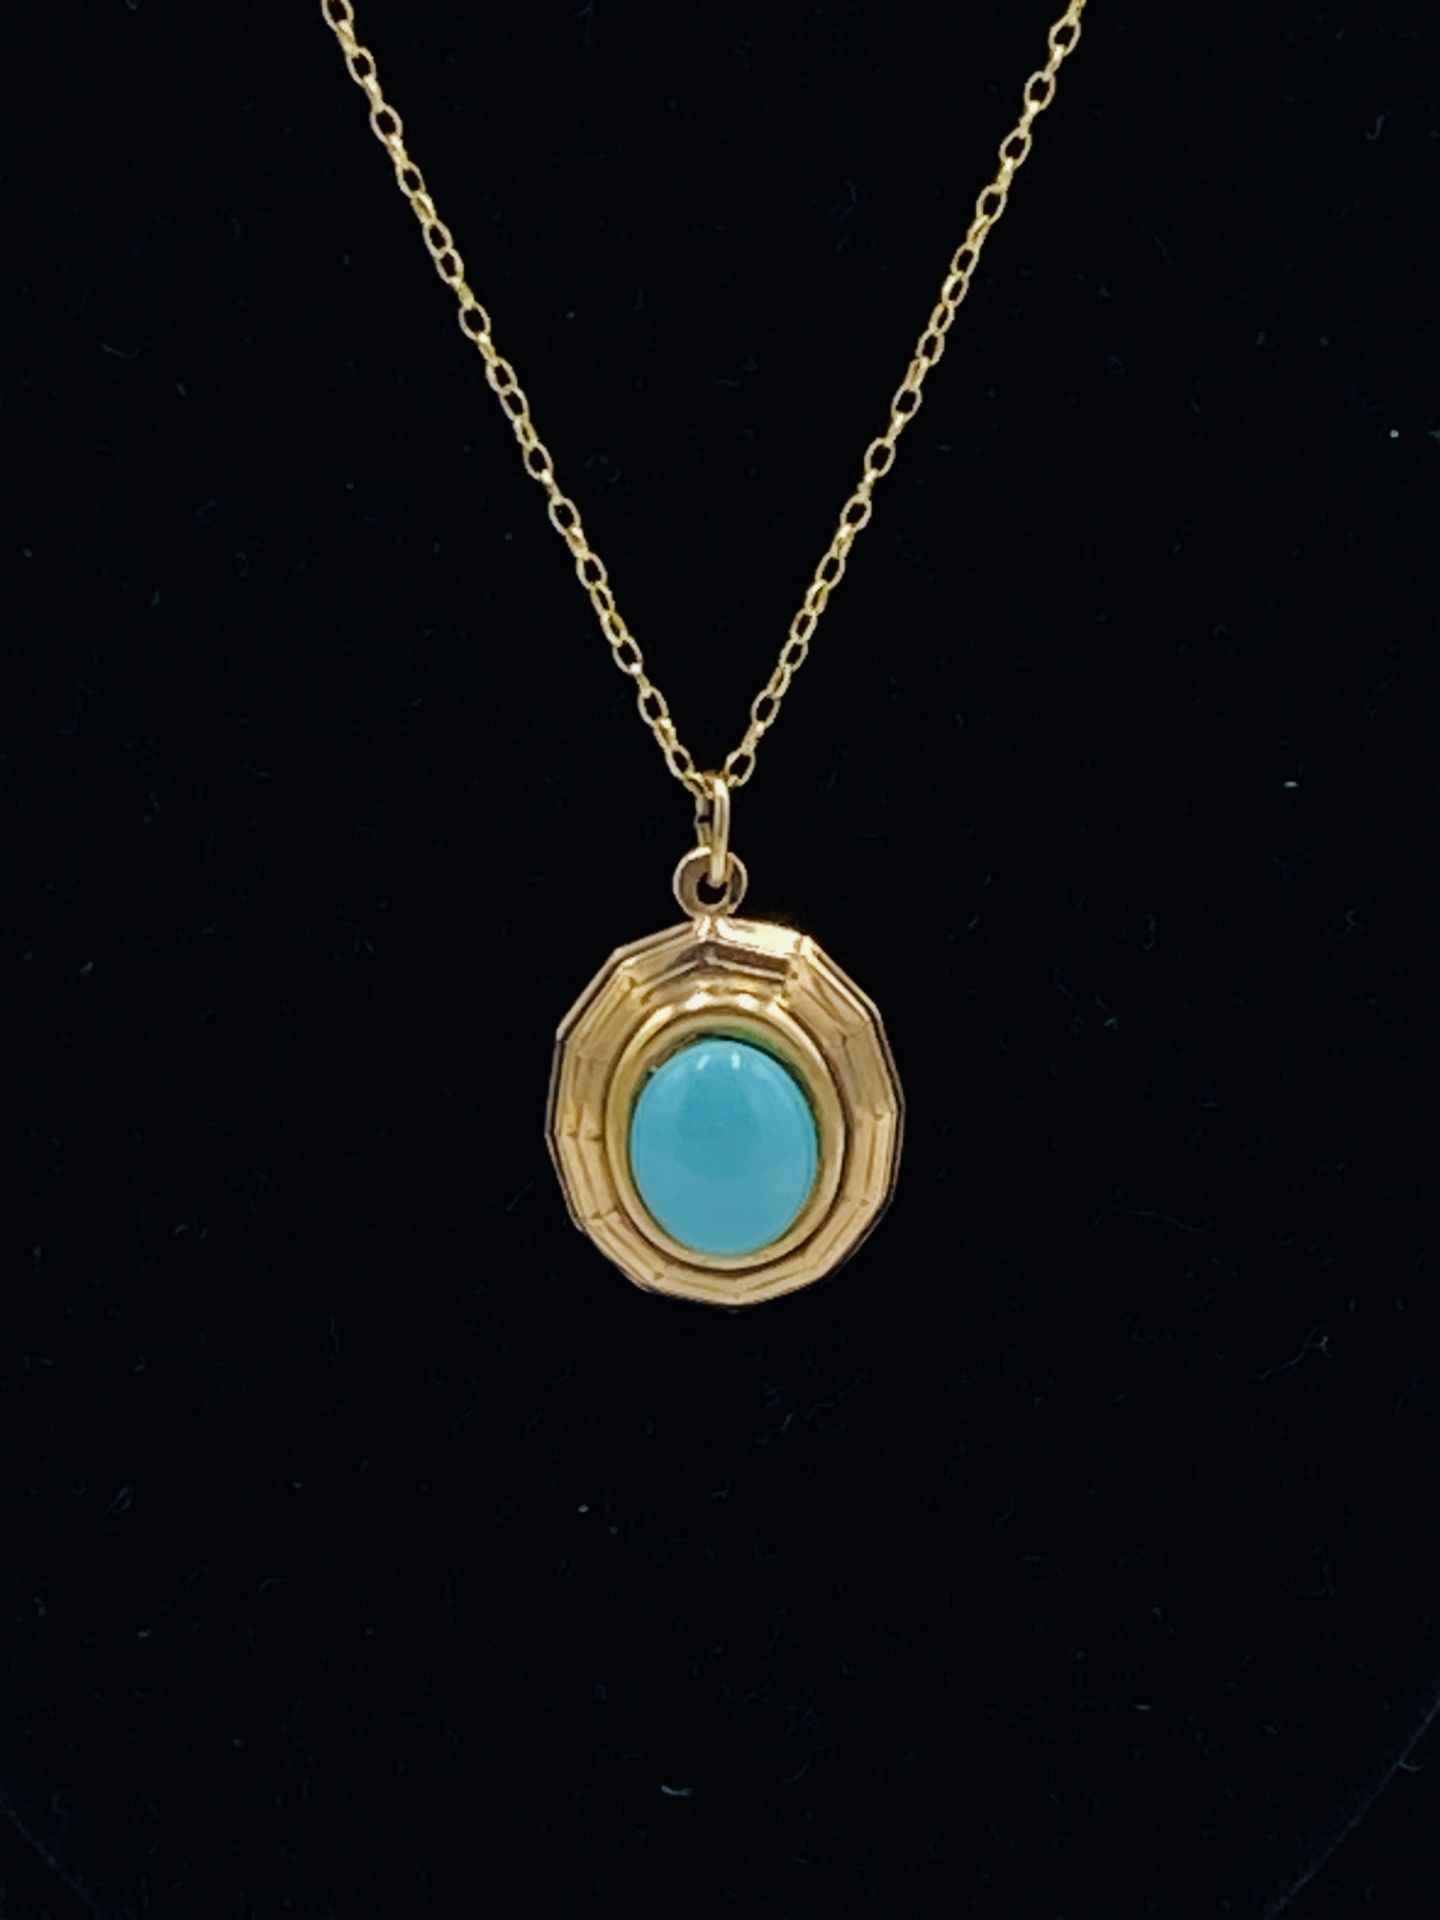 9ct gold necklace with turquoise stone pendant - Image 3 of 4